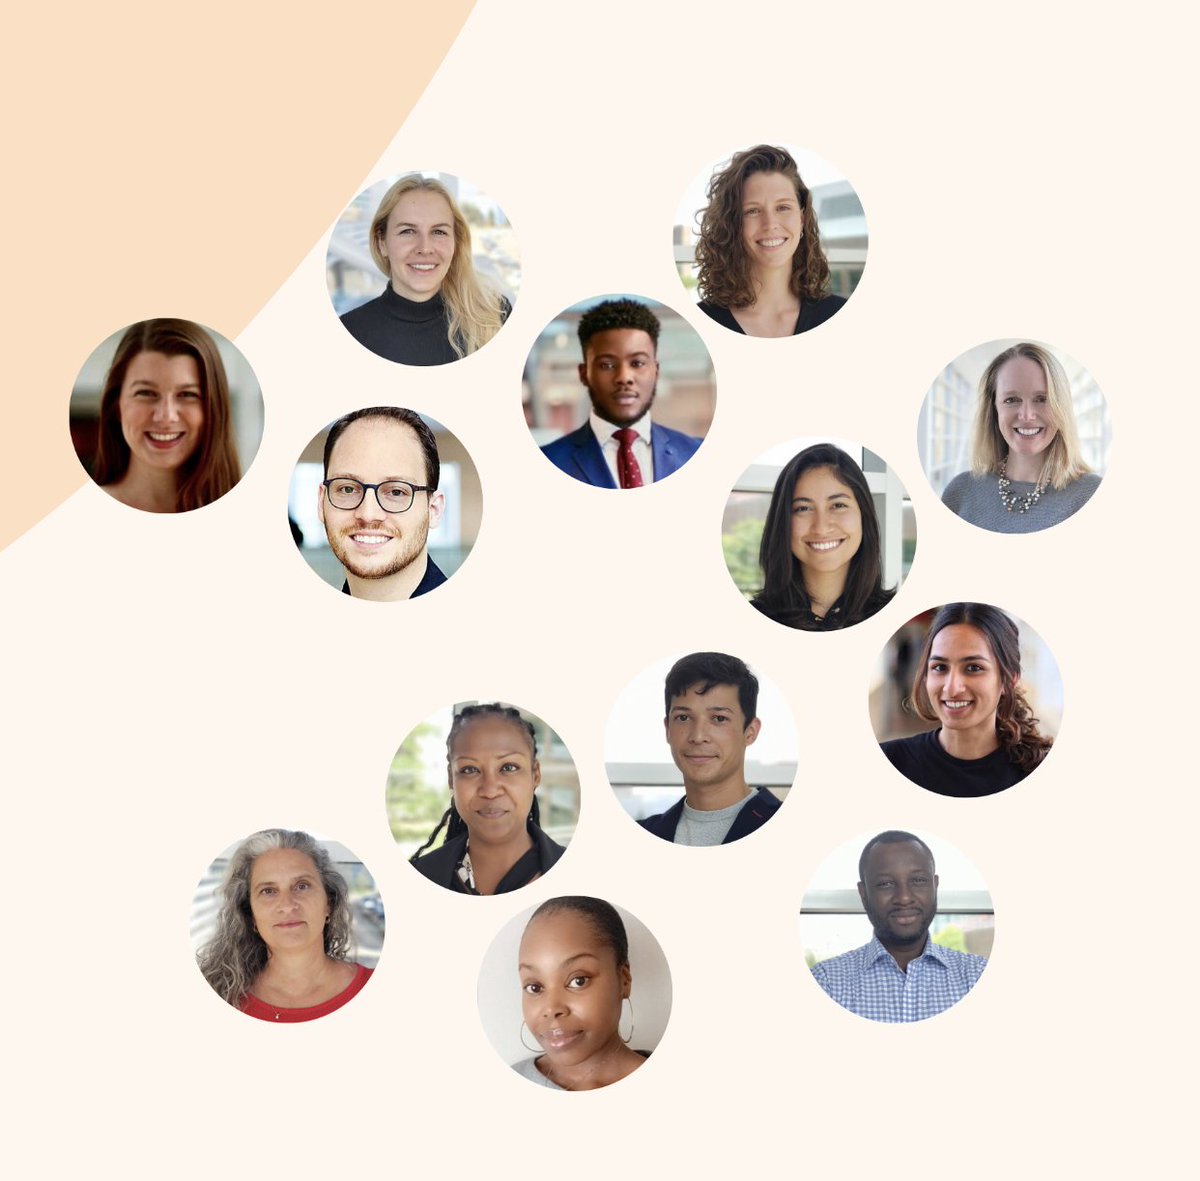 The AMR Policy Accelerator Team consists of a diverse group of interdisciplinary researchers and policy analysts with professional backgrounds that include epidemiology, international law and veterinary science. Meet the team 🔎 amrpolicy.org #AMRpolicy